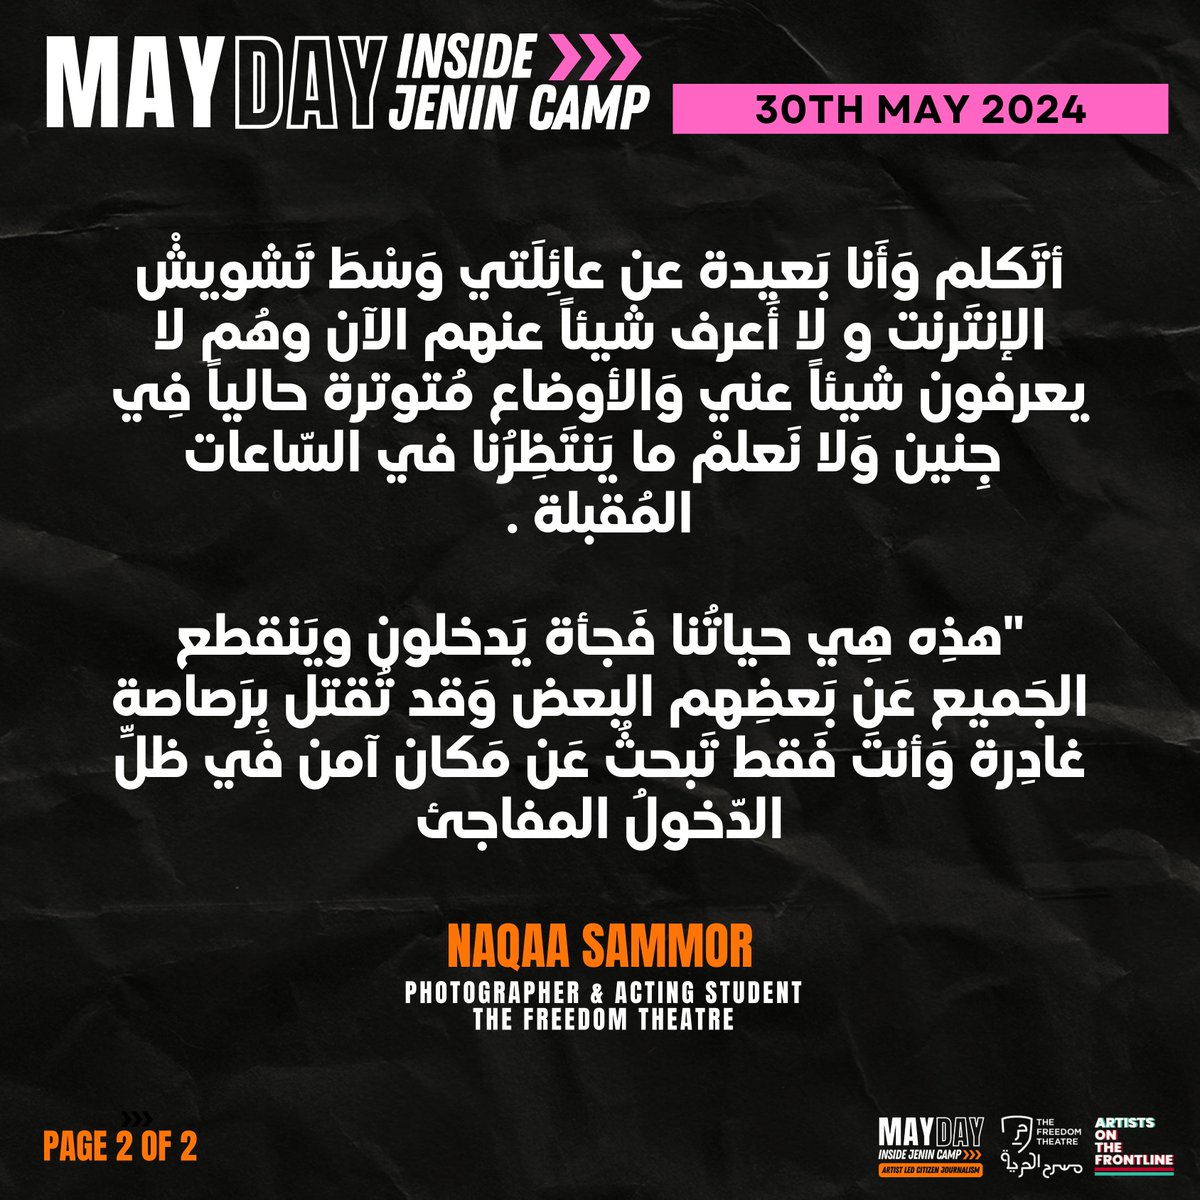 Surrounded by army, Naqaa Sammor sends an update on the invasion #Mayday Created by @freedom_theatre & @artistfrontline ALL UPDATES FROM MAYDAY theculturalintifada.com/attacks-2023-2… #Jenin #JeninUnderAttack #westbank #Palestine #Theatre #جنين